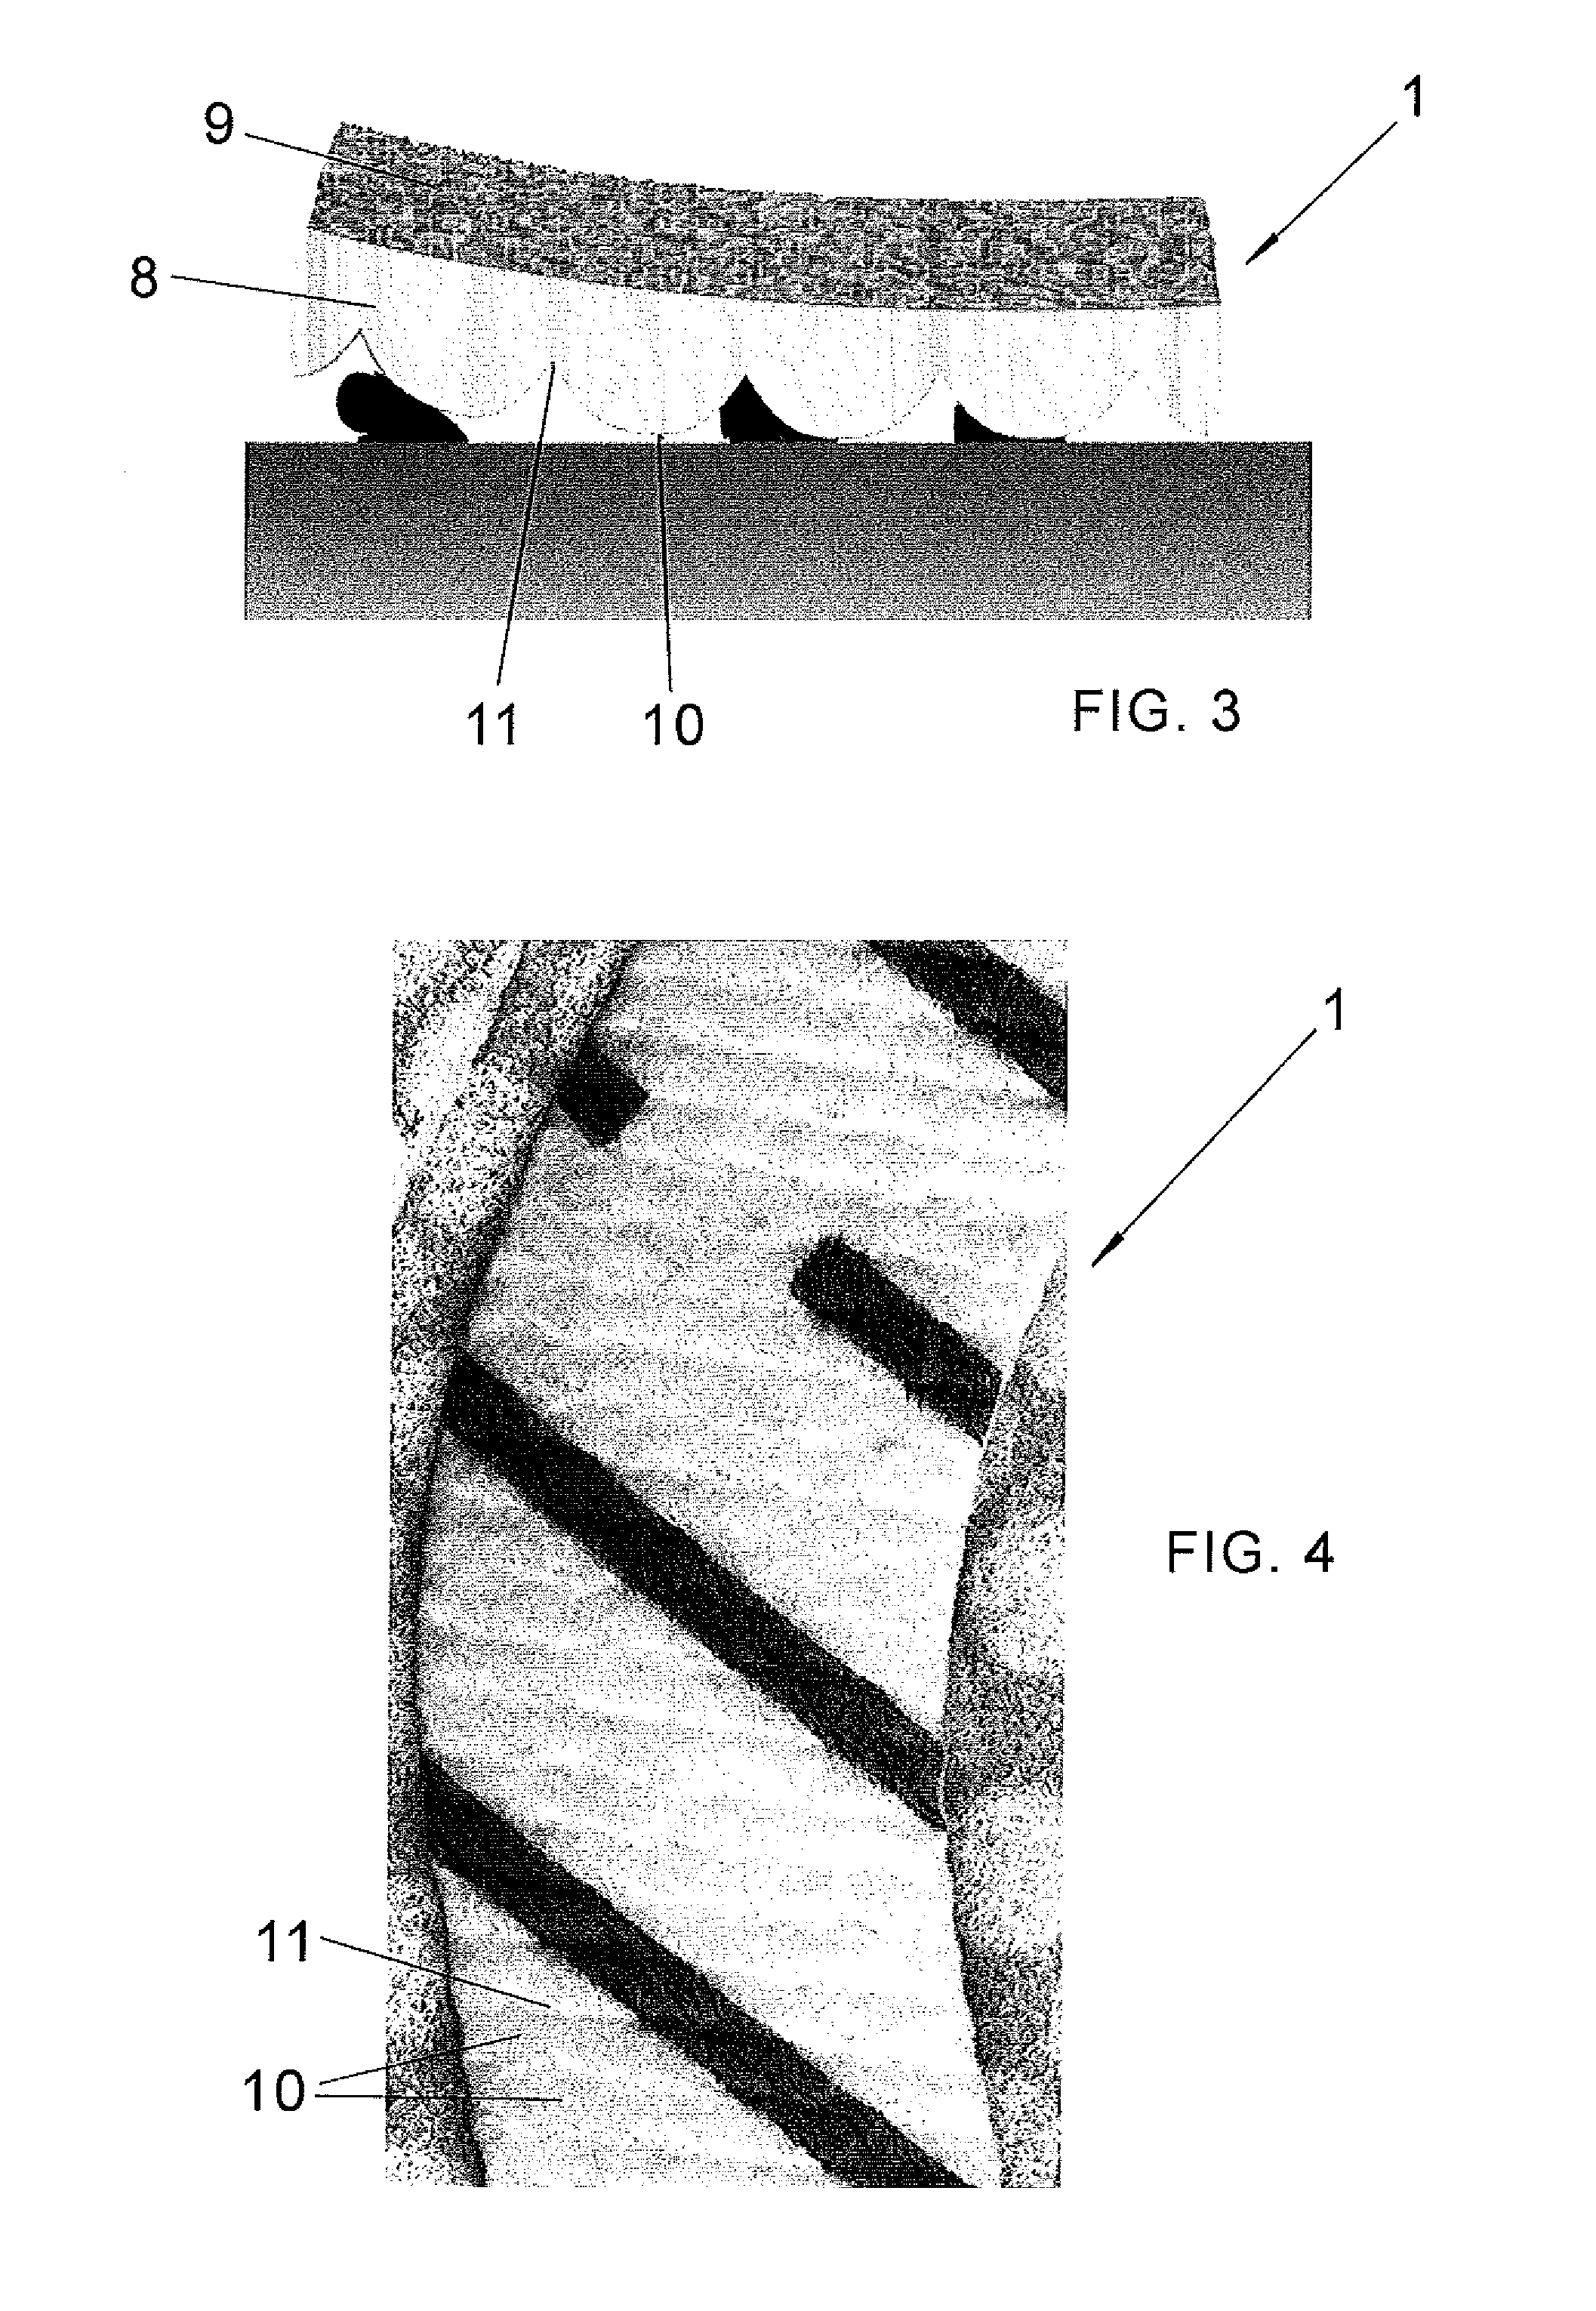 Cleaning device comprising a strip mop with strips covered with microfiber for cleaning floors